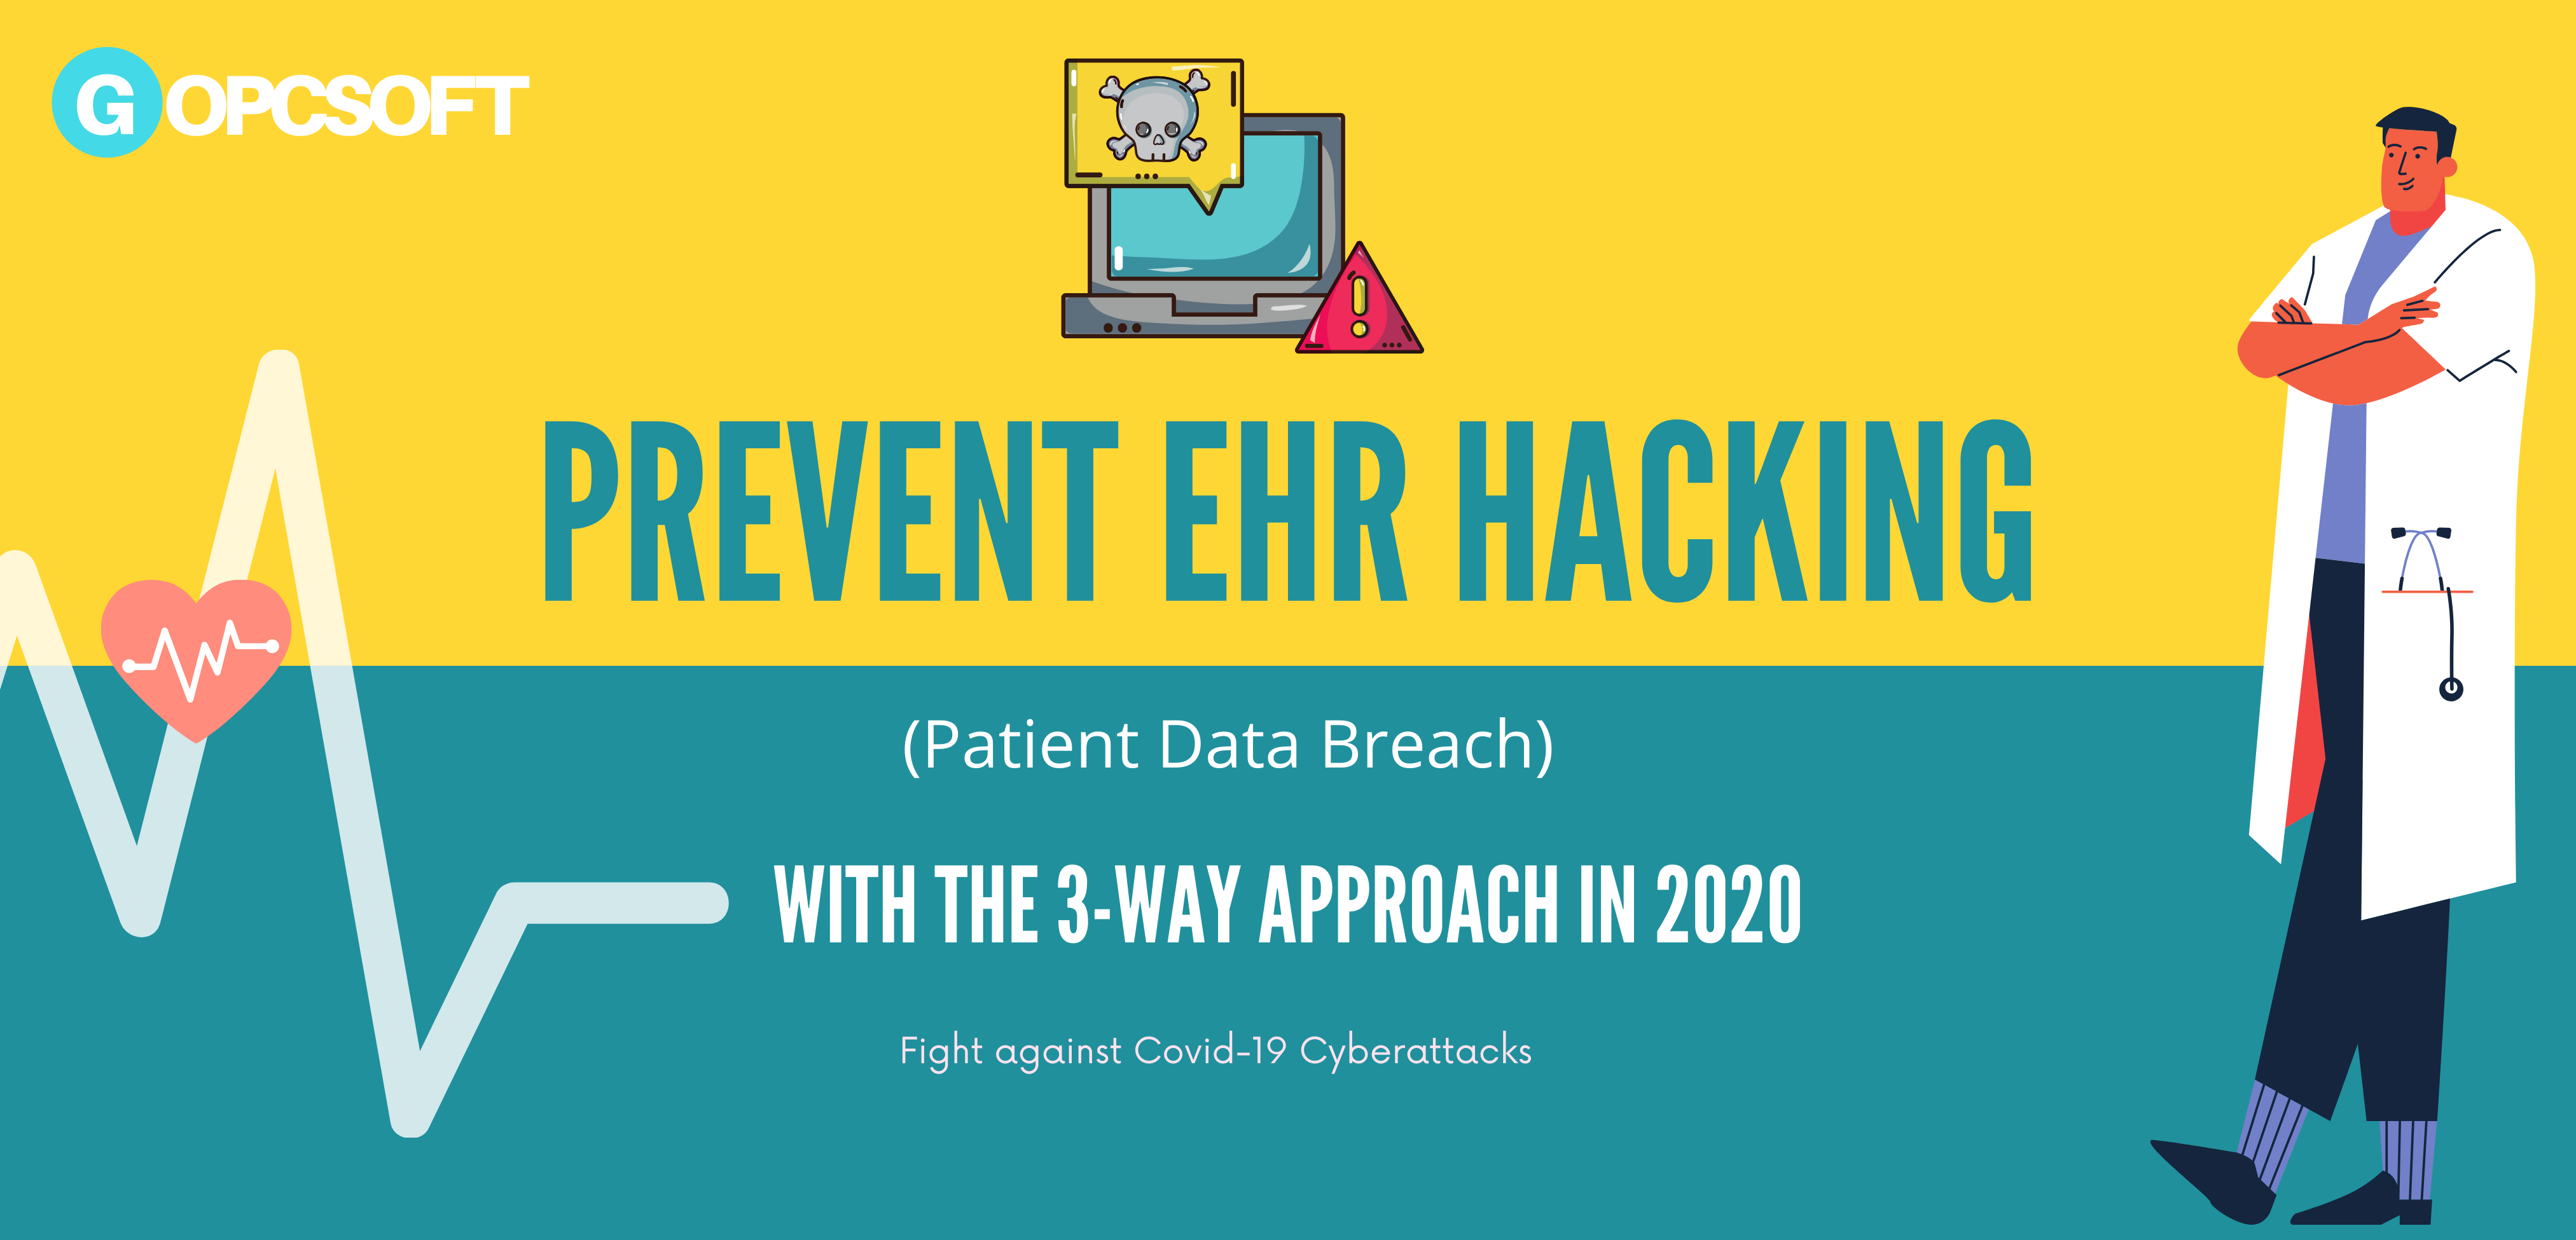 Prevent EHR hacking (patient data breach) with the 3-way approach in 2020